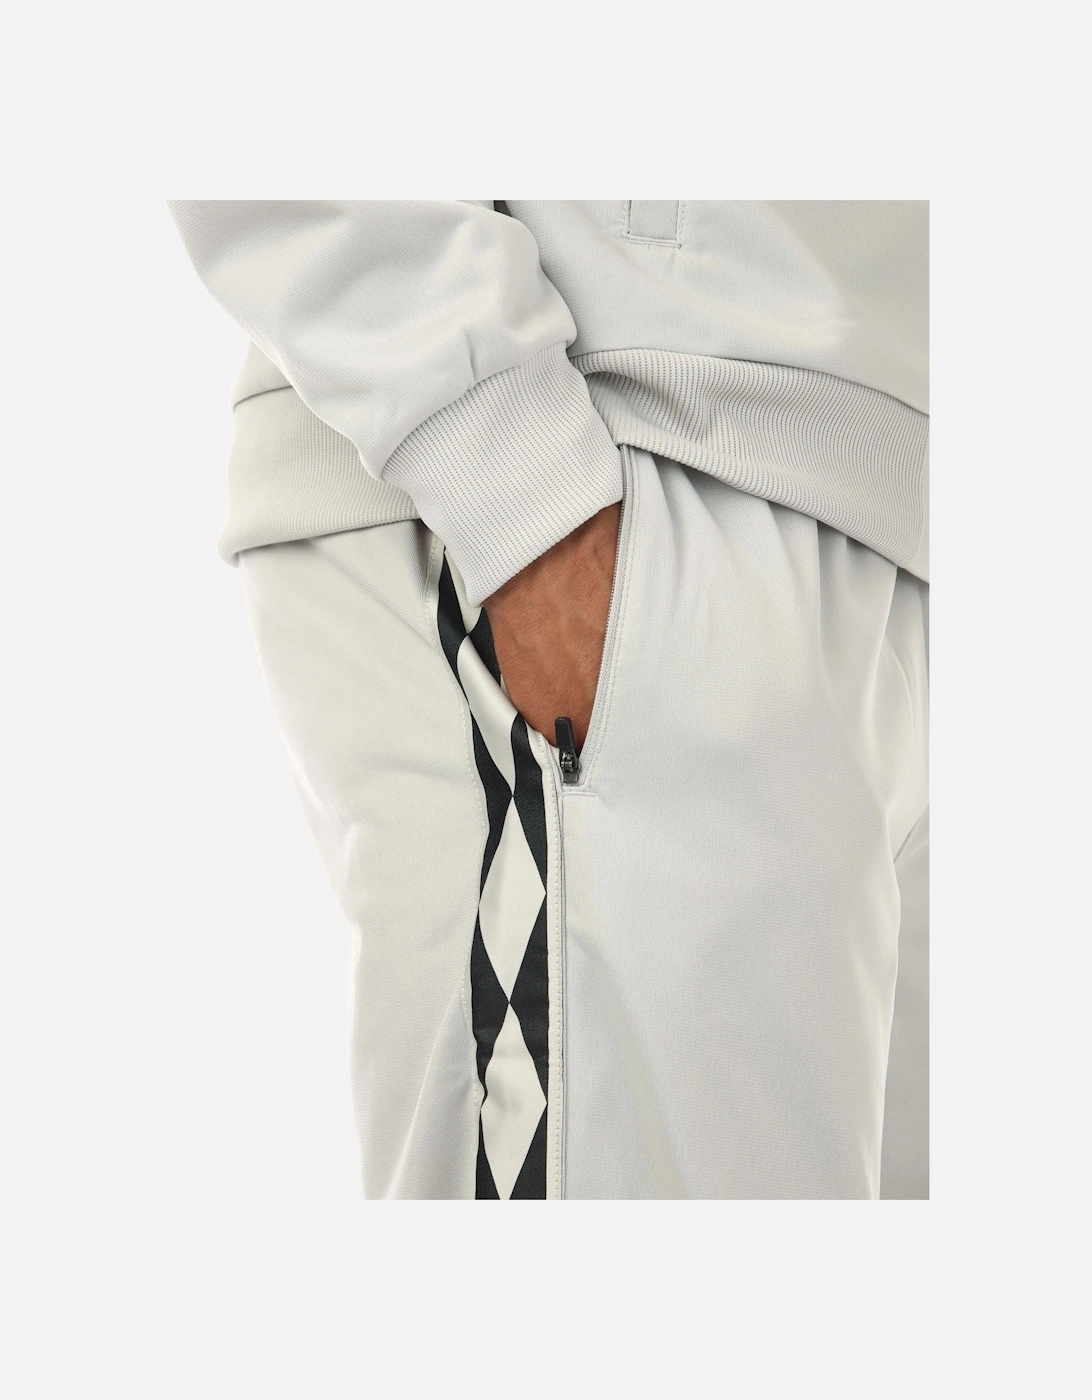 Mens Taped Tricot Track Pants